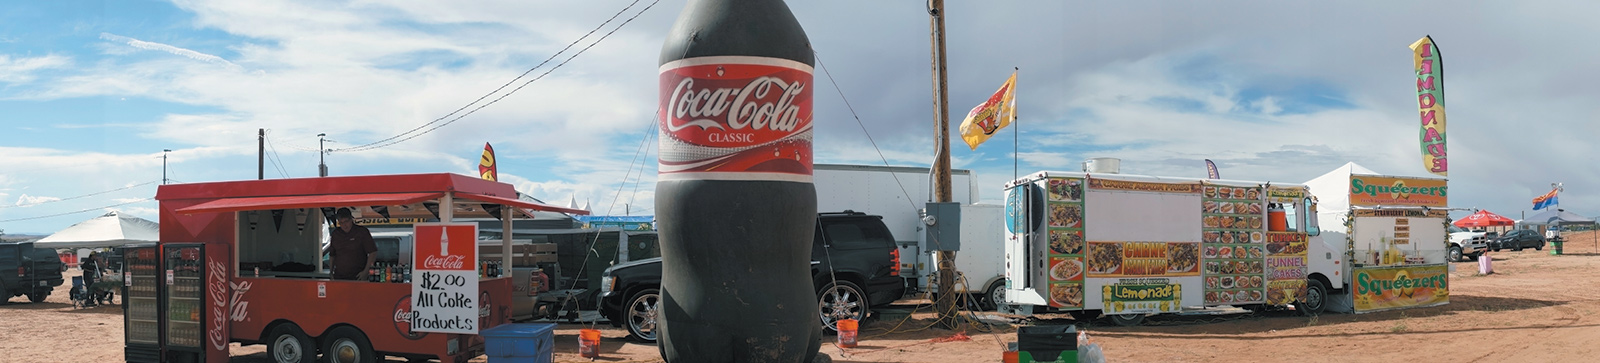 Coca-Cola for sale at the Western Navajo Nation Fair, Tuba City, Arizona, October 2015; photograph by Larry Towell